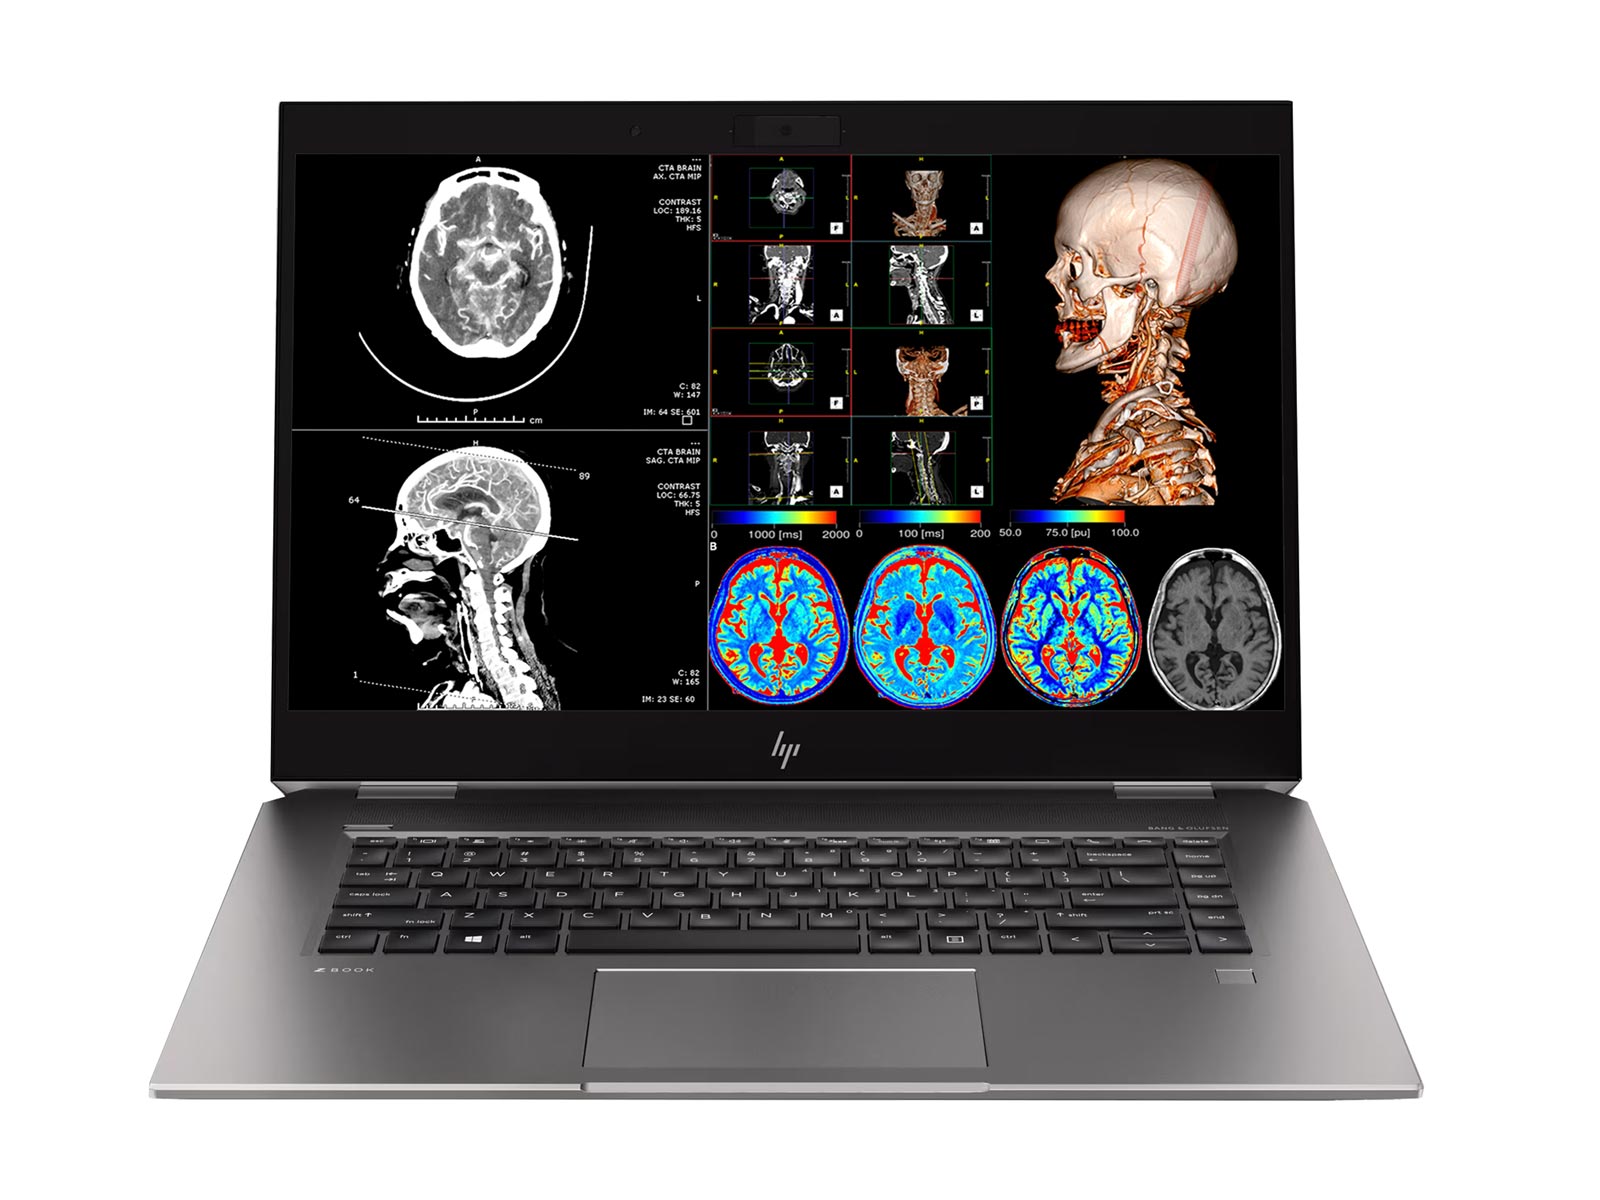 HP ZBook Studio G5 Mobile Radiology Workstation | 15.6" 4K LED | Intel Core i7-8850H @ 4.30GHz | Hexa Core (6-Core) | 32GB DDR4 2666MHz | 500GB NVMe | NVIDIA P2000 4GB | Win10 Pro